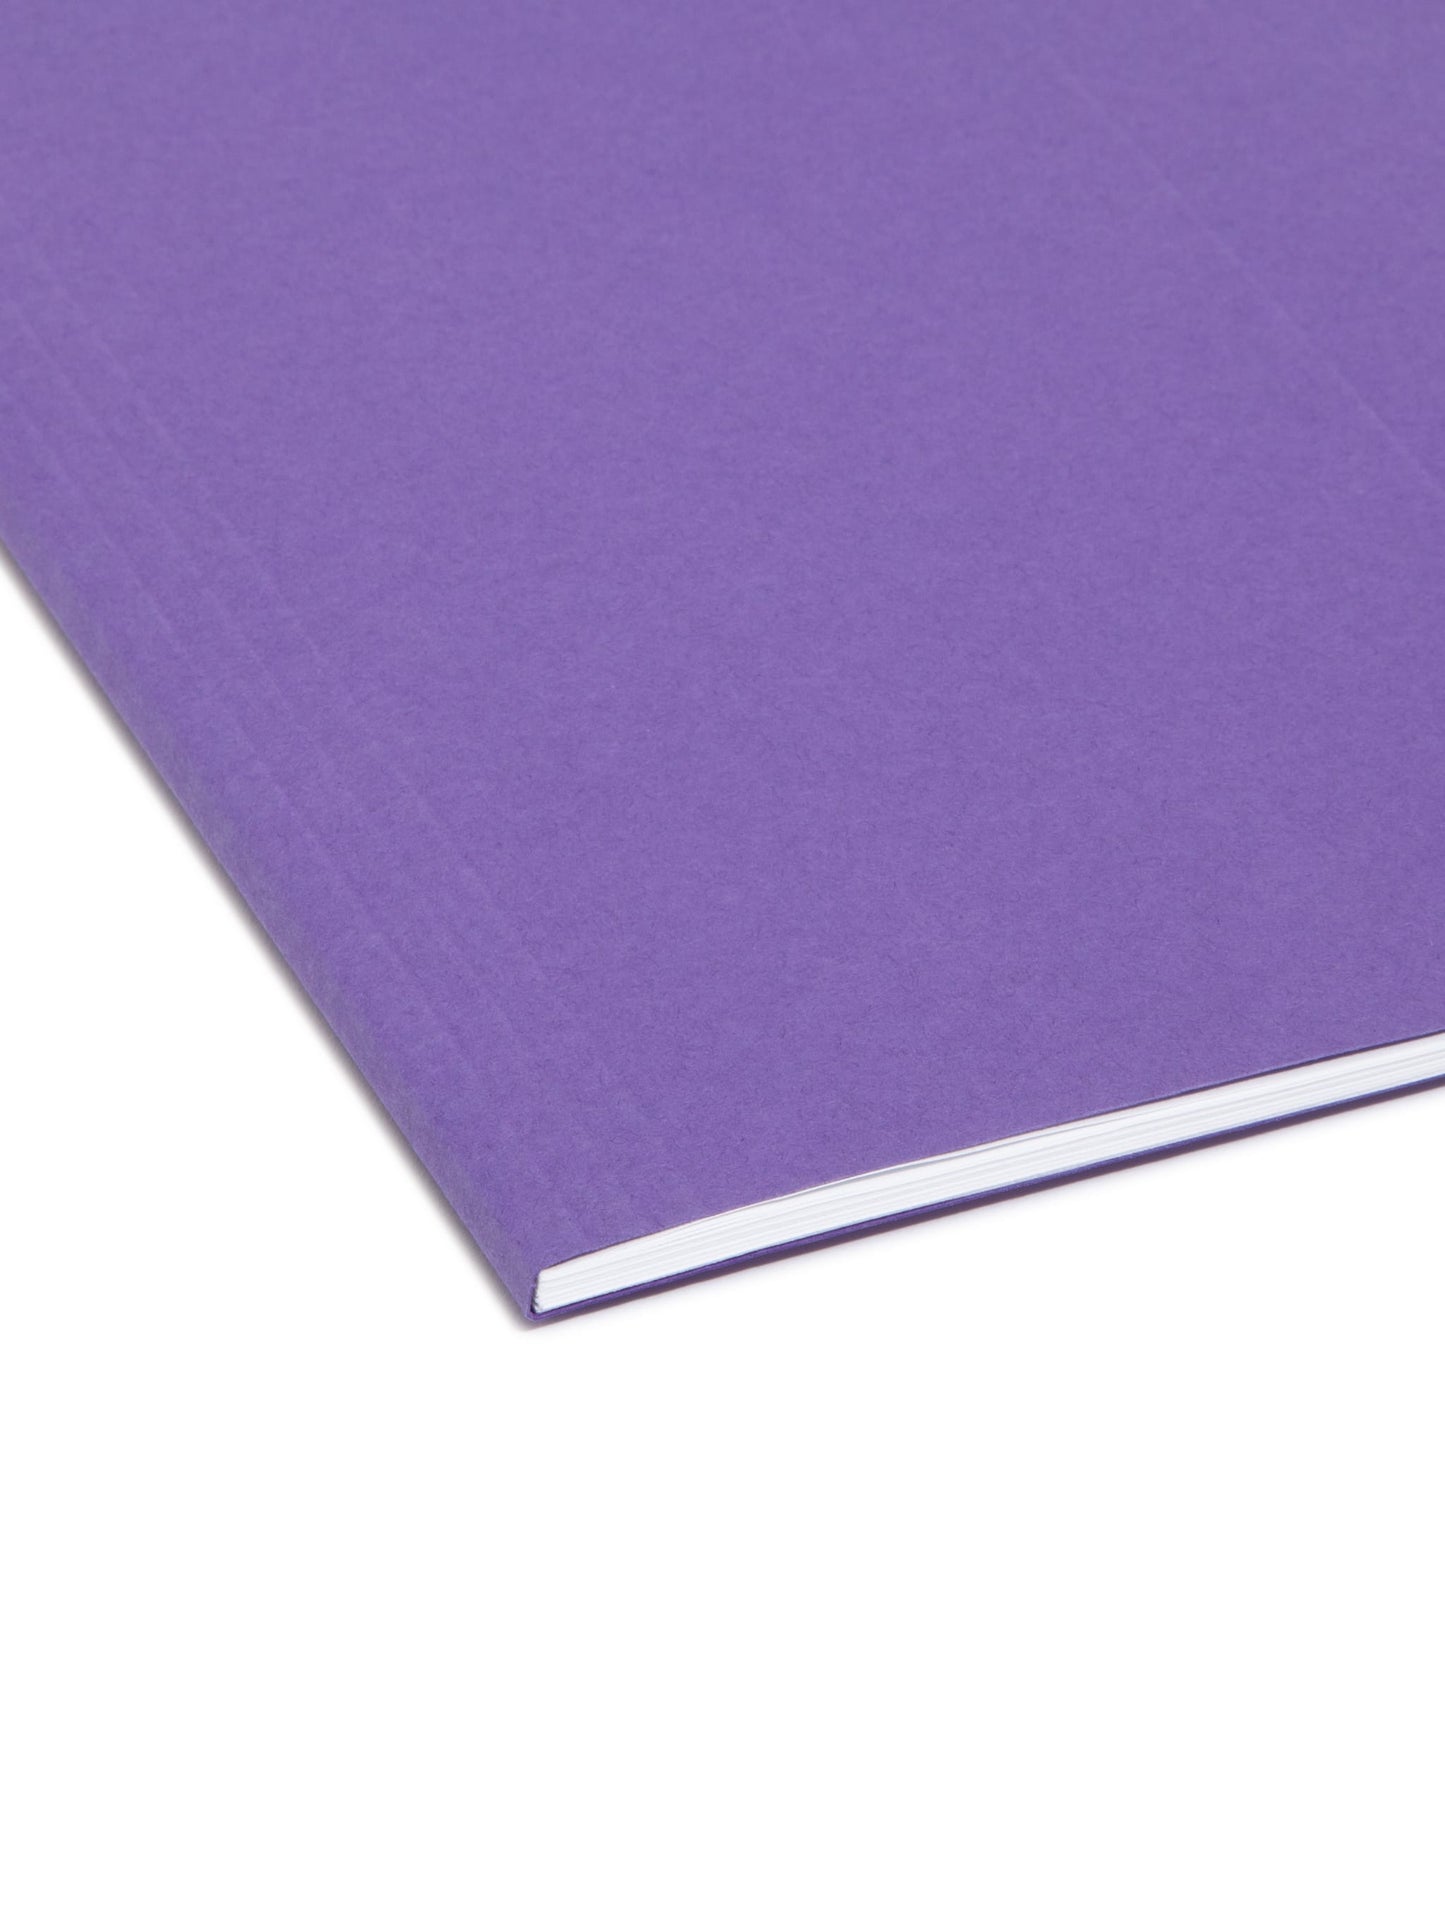 Standard Hanging File Folders with 1/3-Cut Tabs, Purple Color, Letter Size, Set of 25, 086486640237